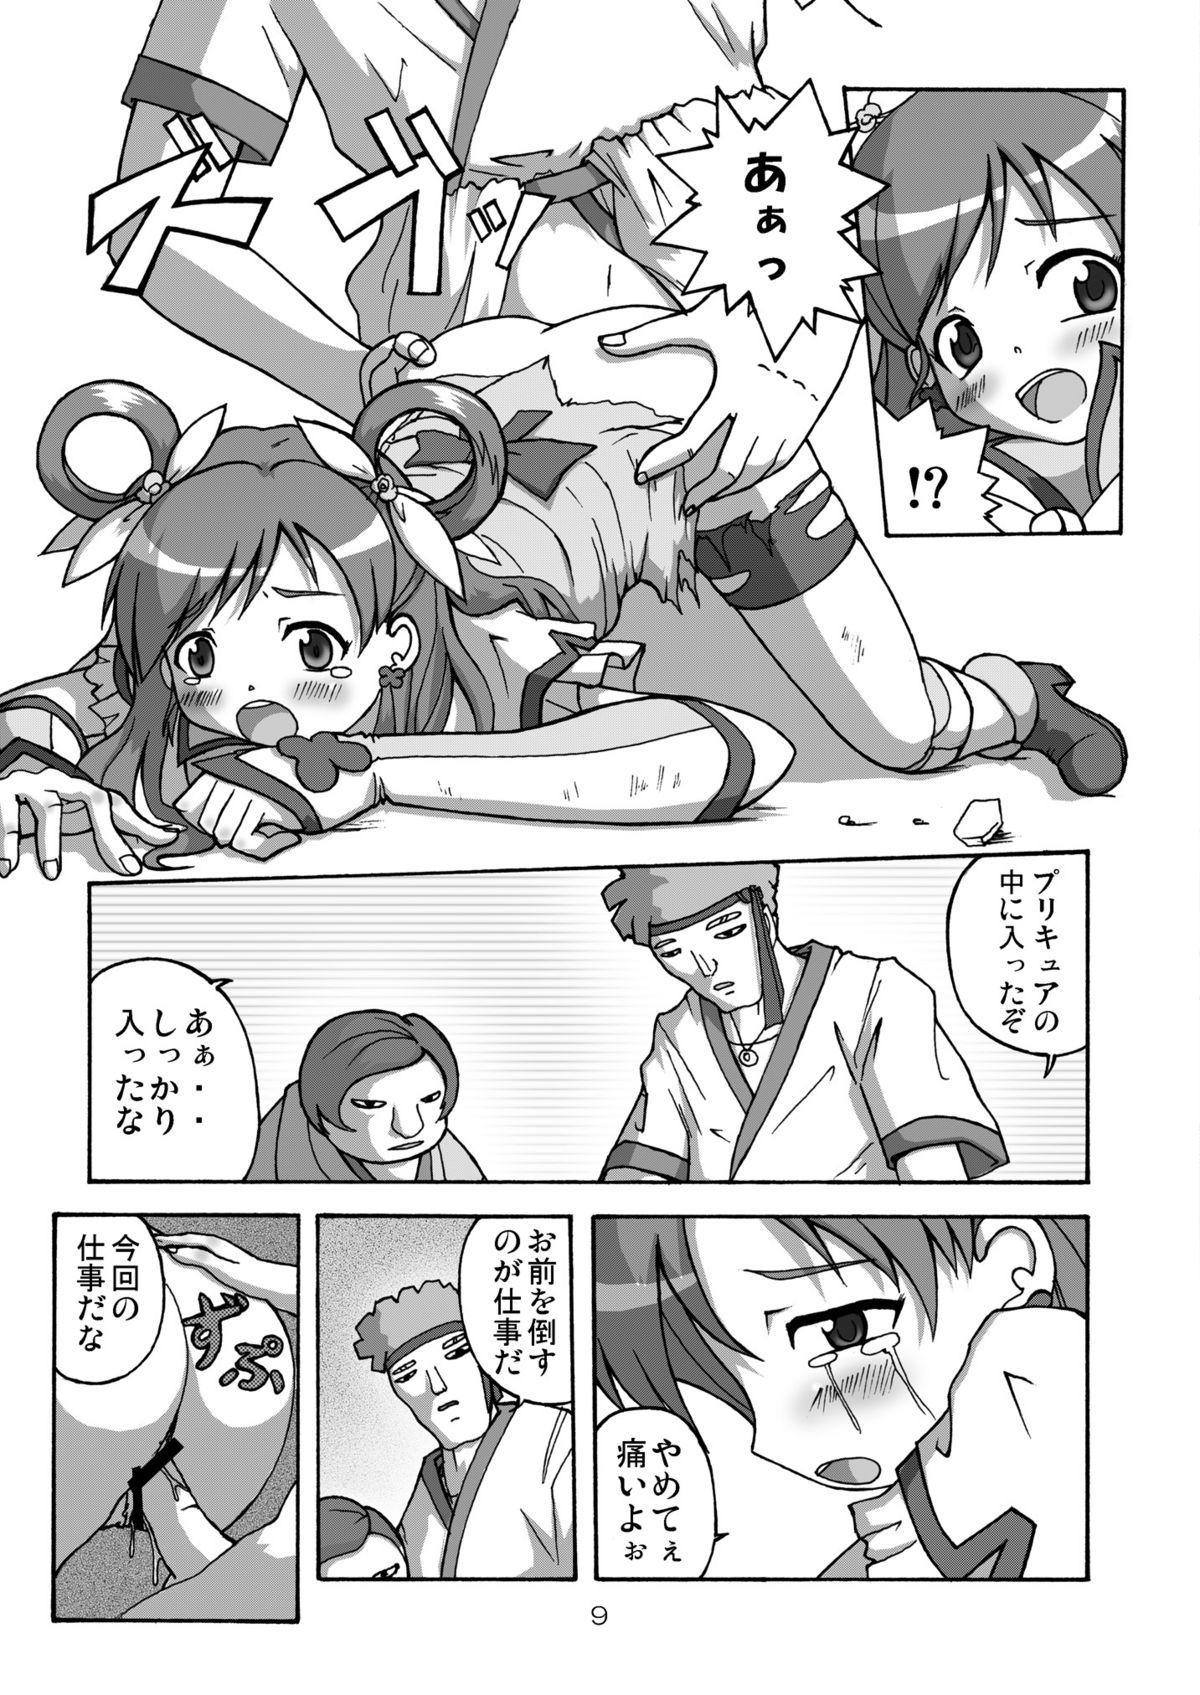 Pussy Fingering Bara no senshi-tachi | Fighter of Rose - Pretty cure Yes precure 5 Street - Page 9